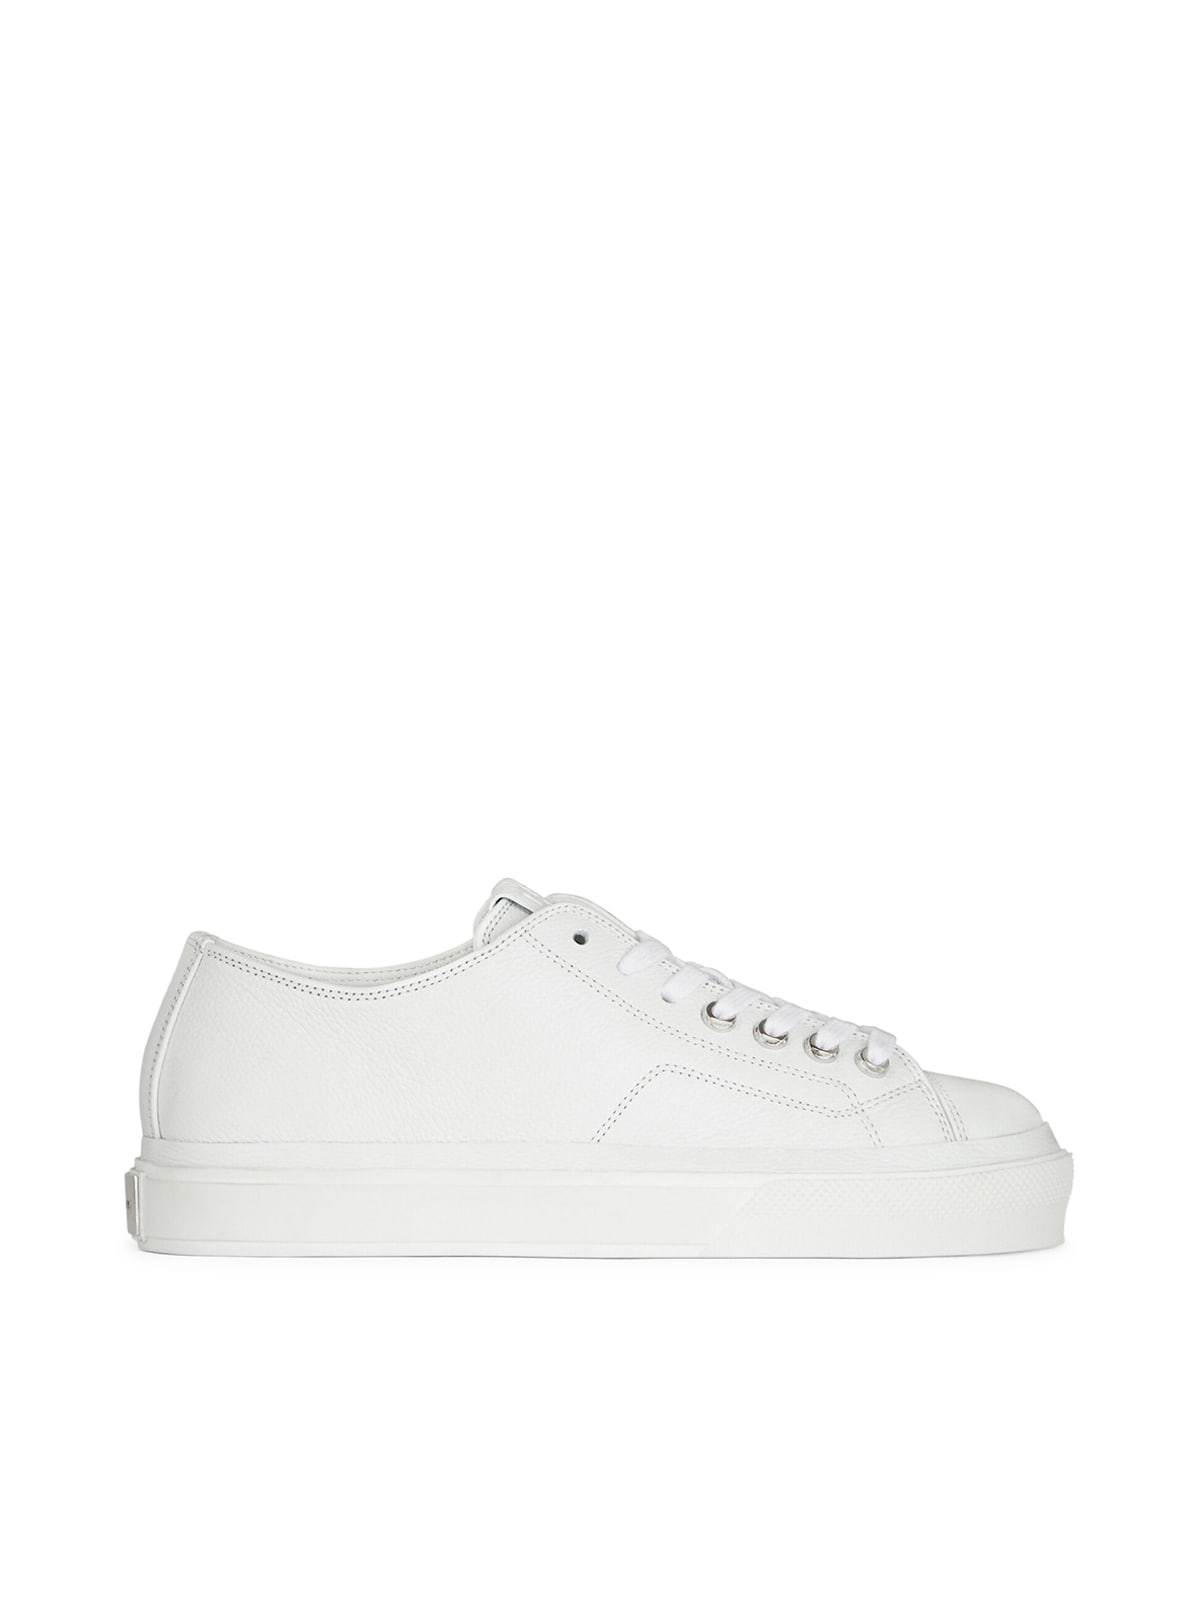 Buy Givenchy City Low Sneaker online, shop Givenchy shoes with free shipping